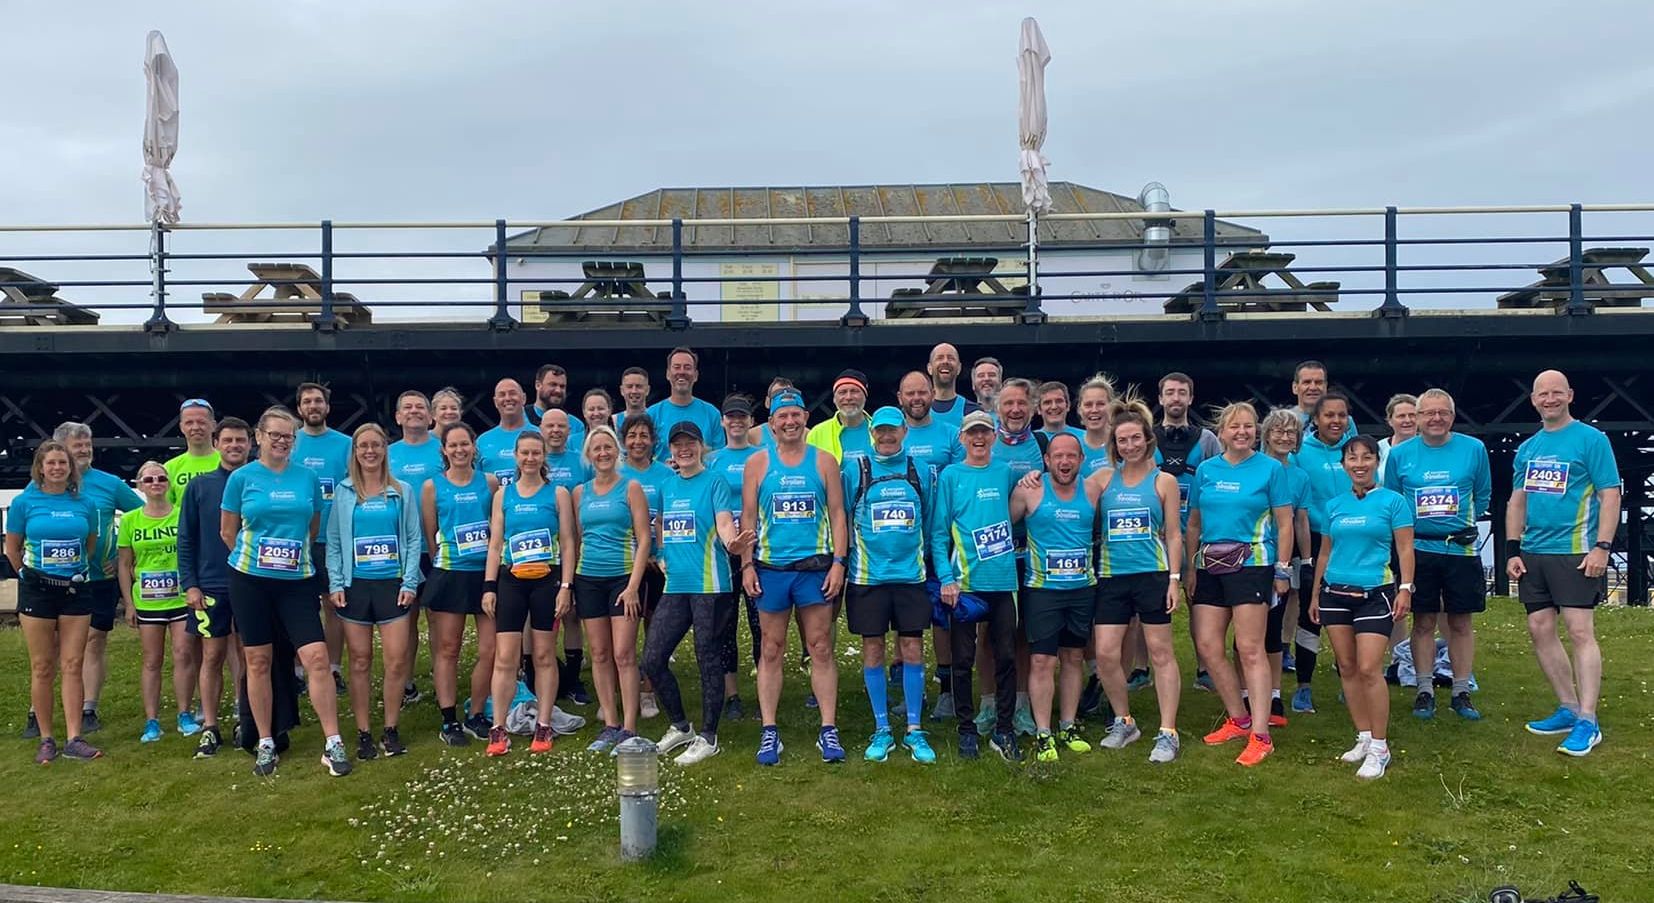 50 members of Southport Strollers took part in the Southport 10K and Half Marathon